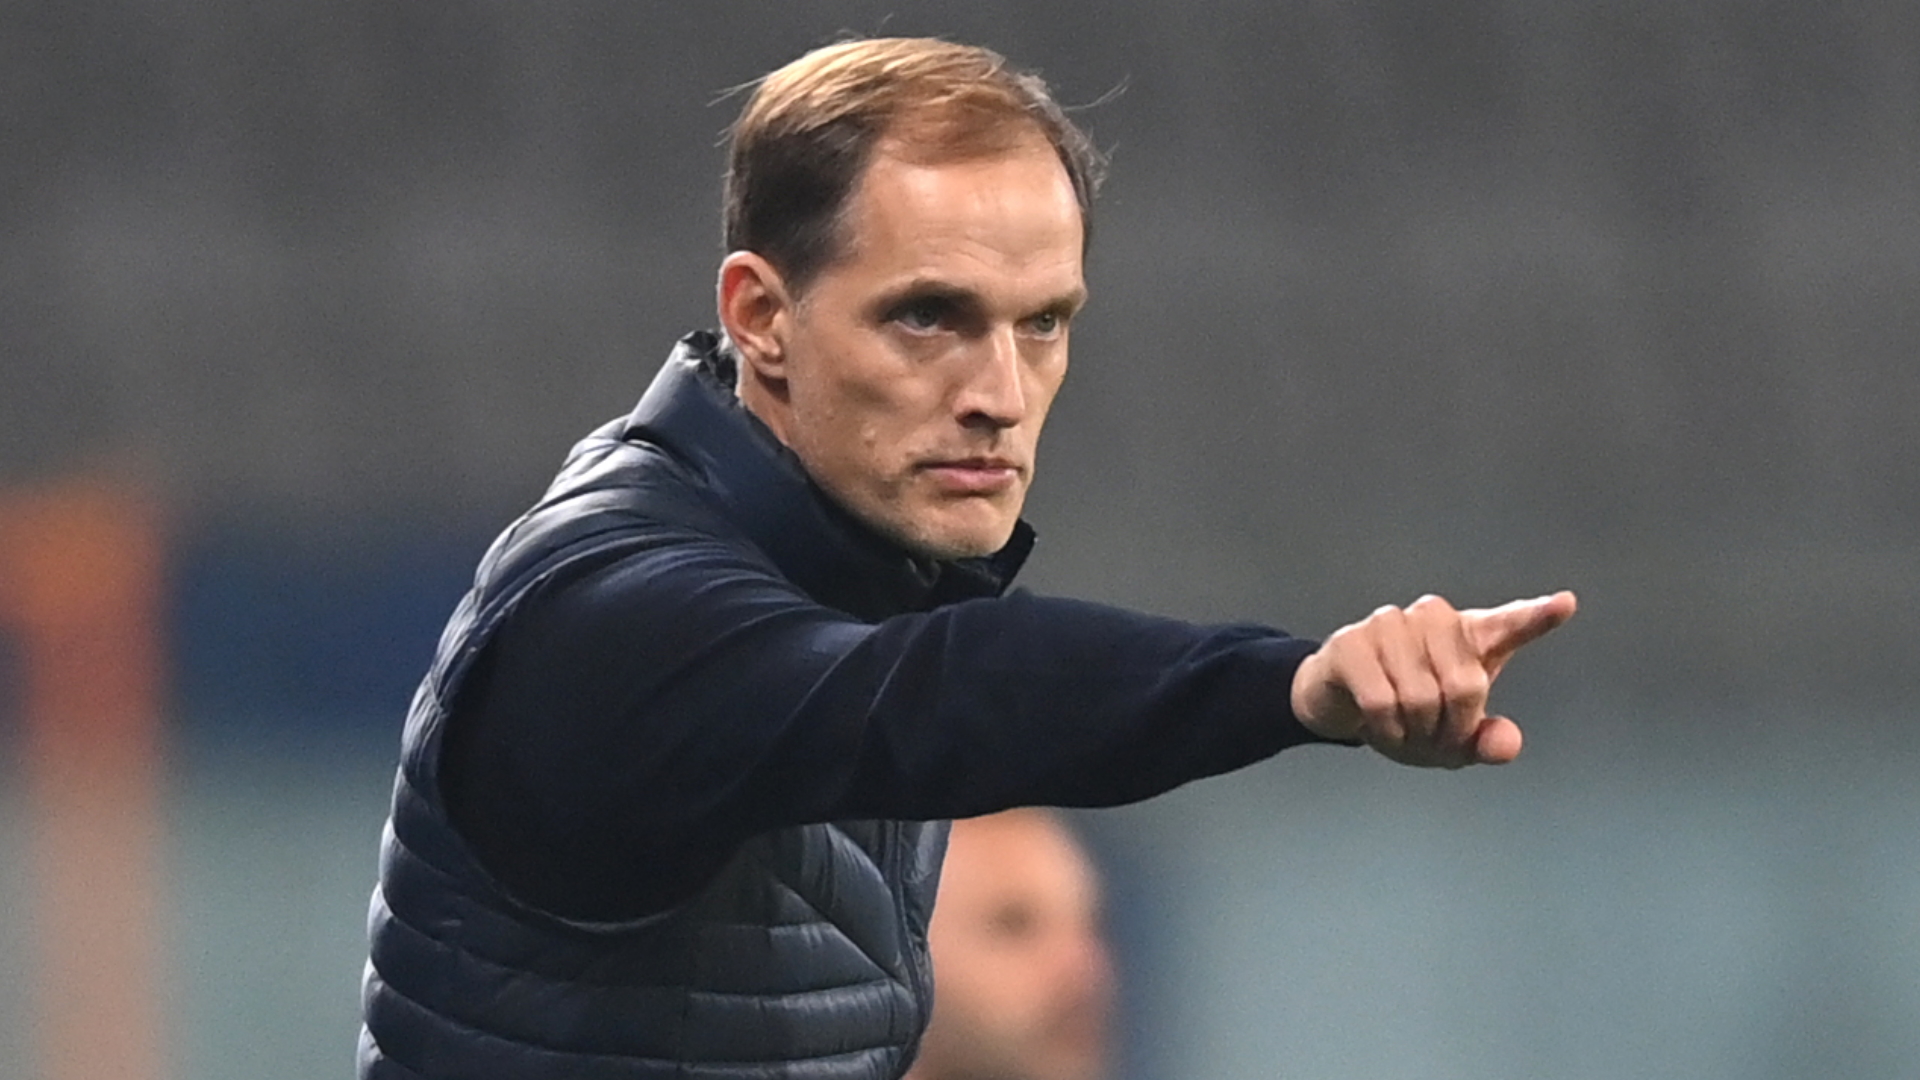 ‘I thought Tuchel had lost his marbles’ – Methods of 'special' new Chelsea boss saluted by Mainz coach Svensson